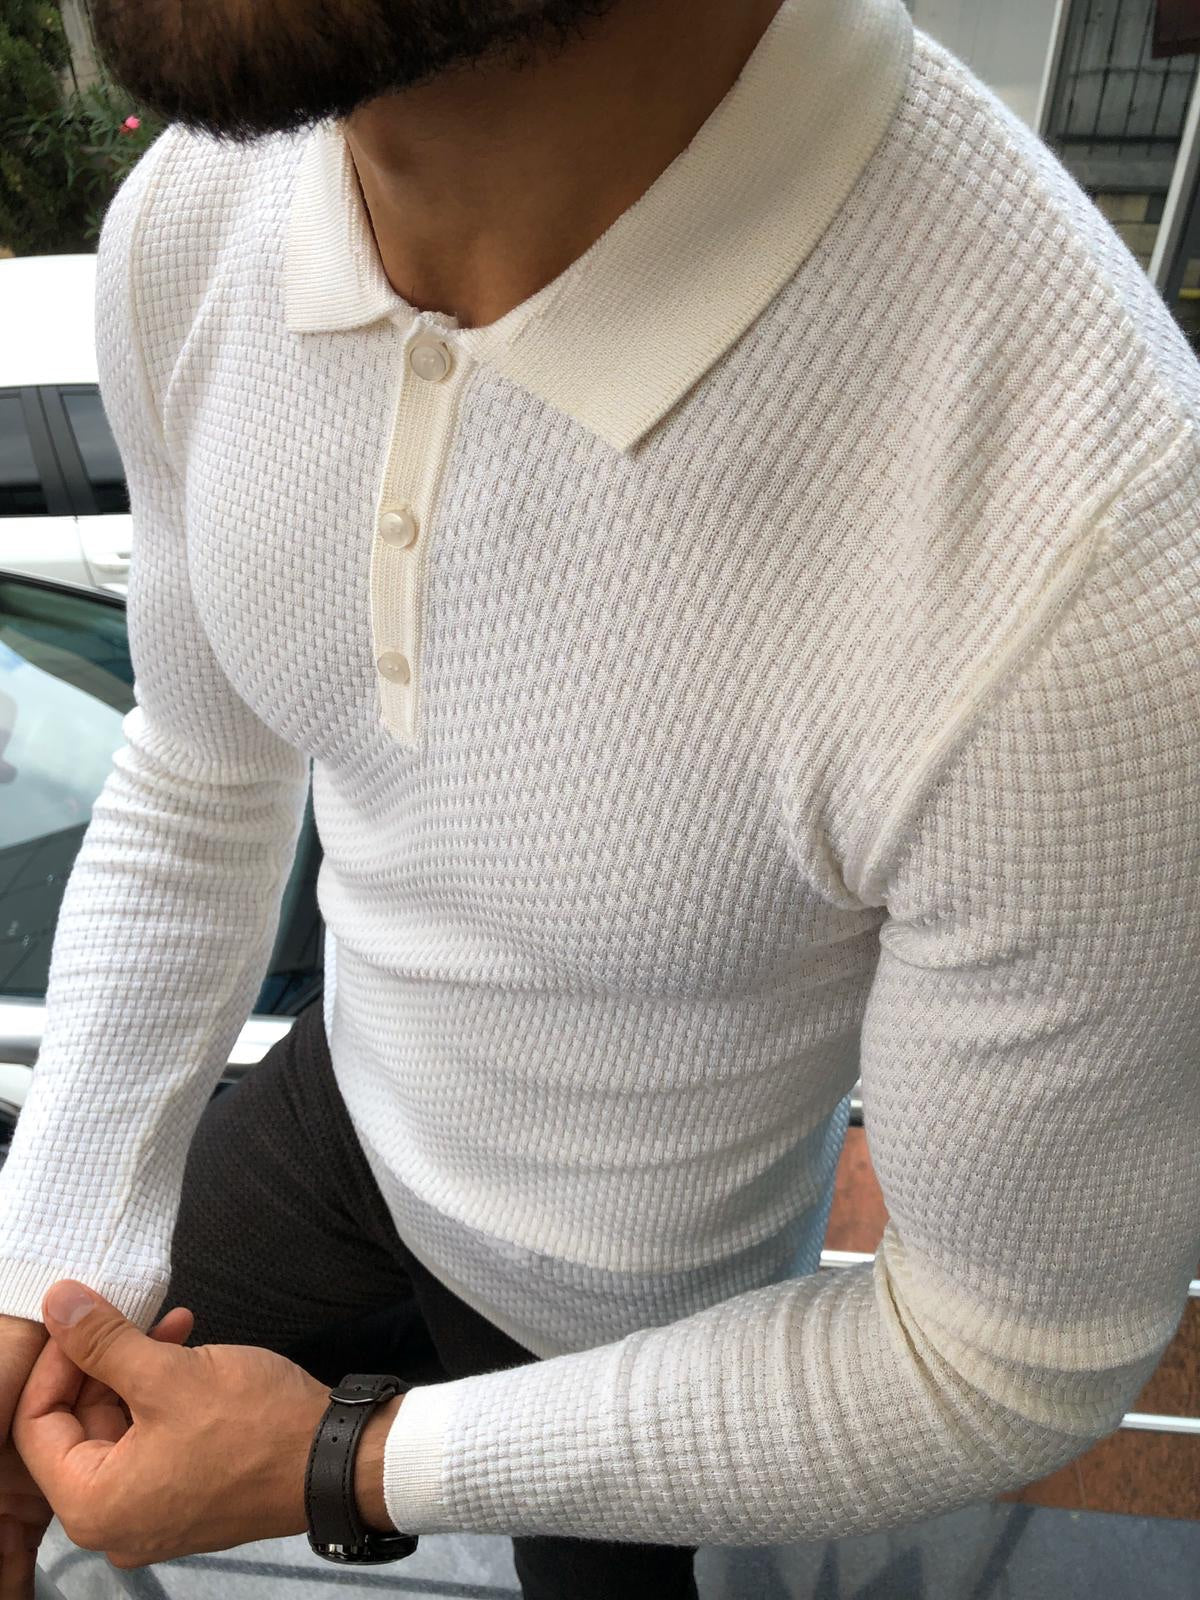 Fabros White Slim Fit Patterned Sweater